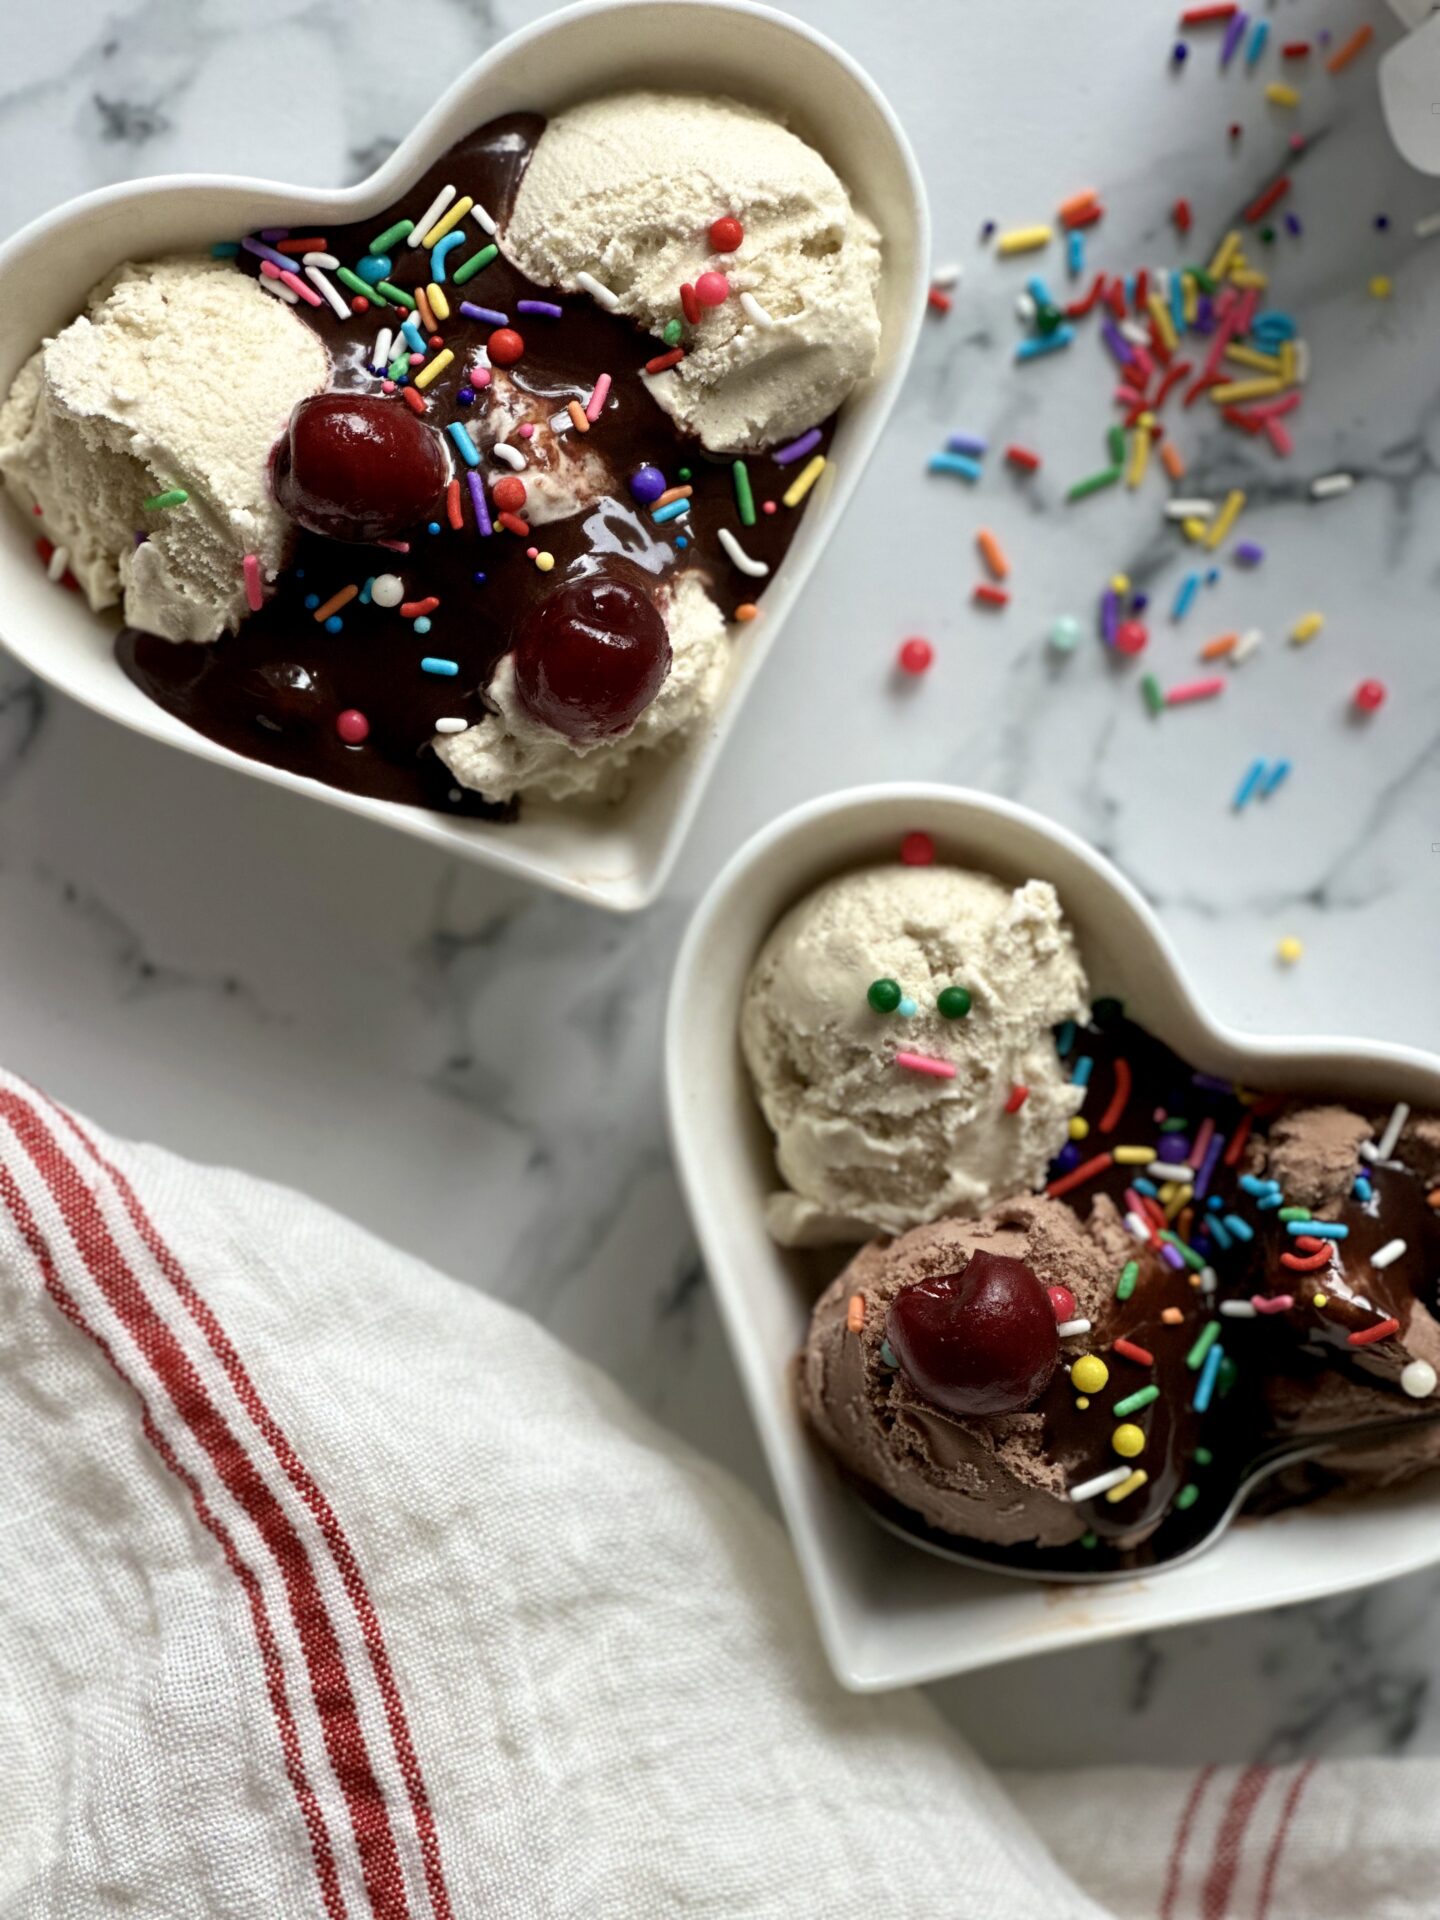 Ice cream sundaes in heart shaped bowls with hot fudge sauce and sprinkles